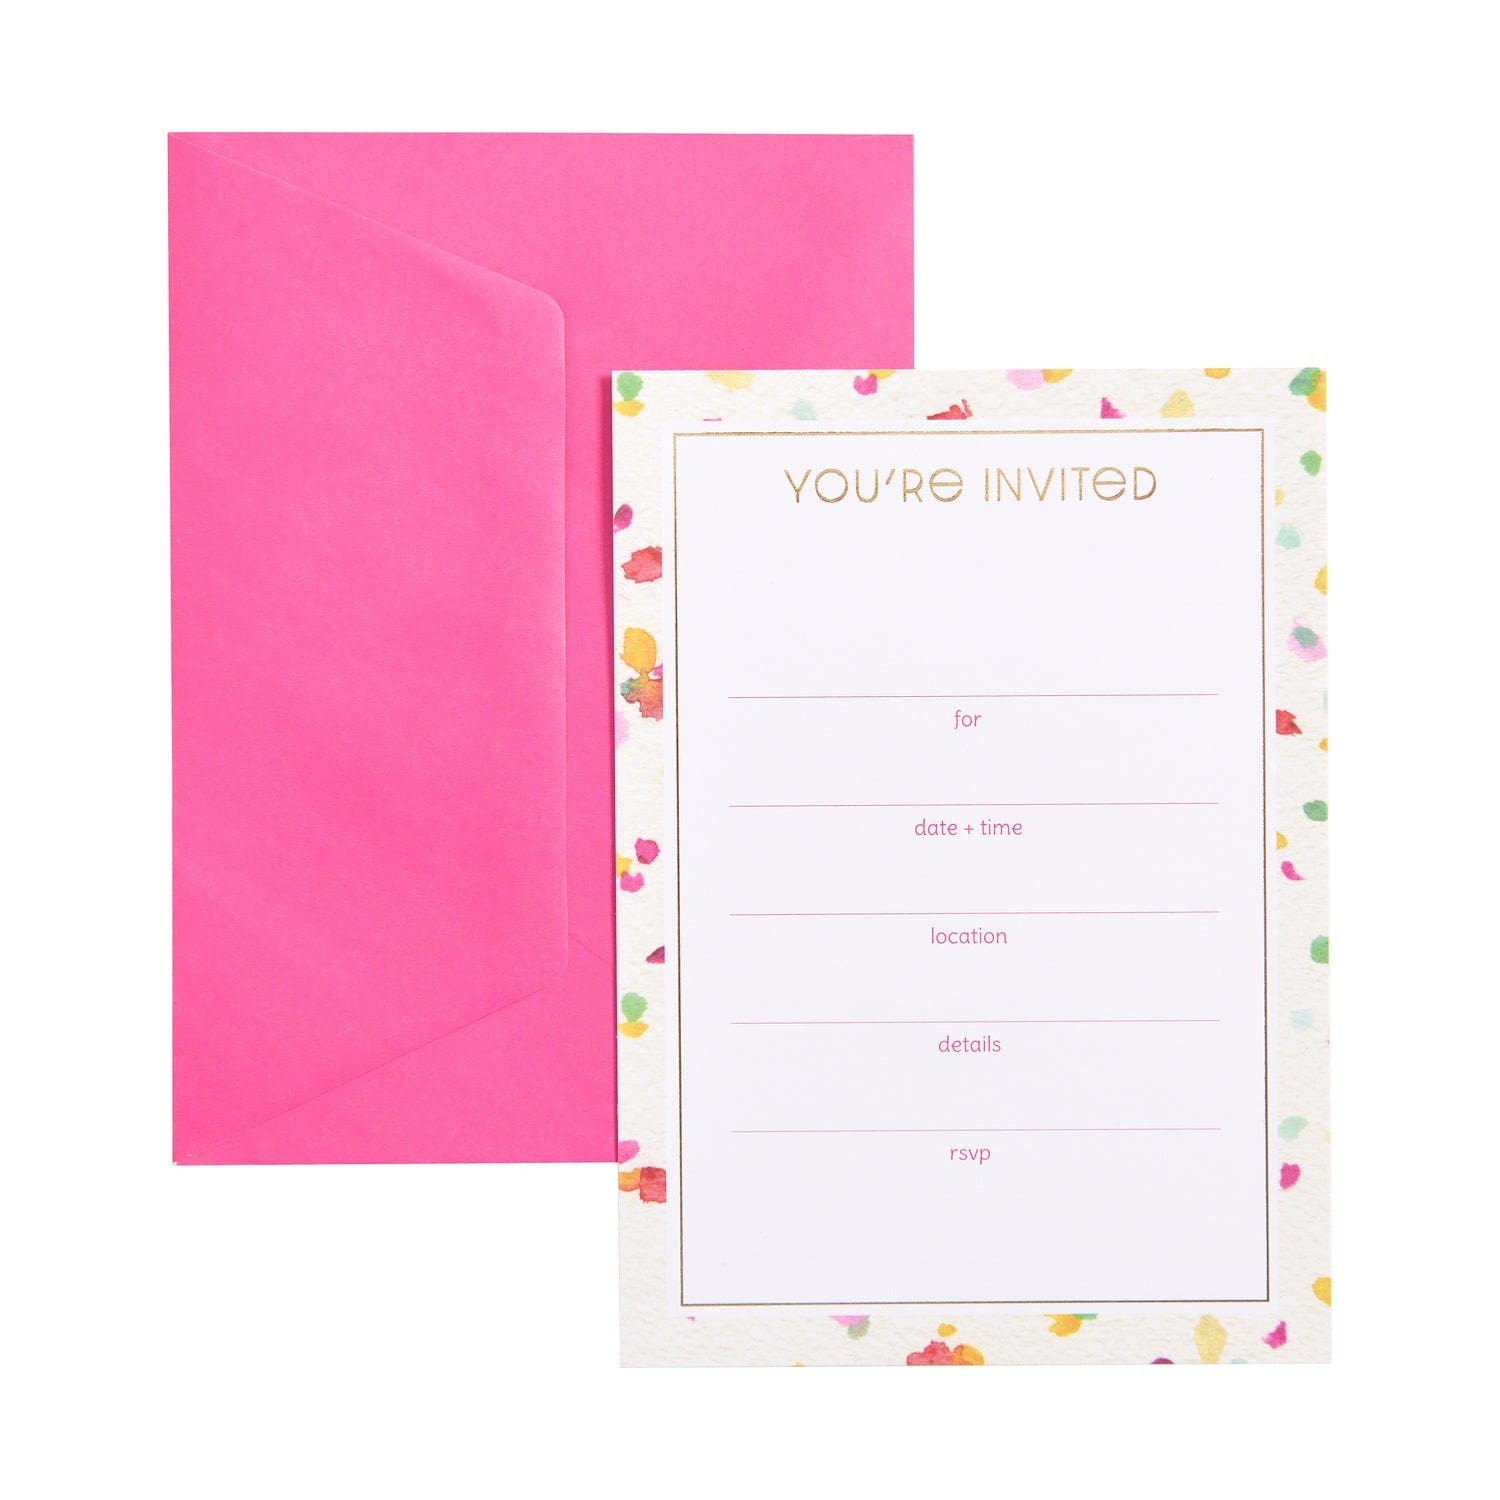 https://cdn.shopify.com/s/files/1/0586/2424/5928/products/confetti-hand-write-or-print-your-own-invitations-set-of-20-94131-39004906782970_2000x.jpg?v=1677693379